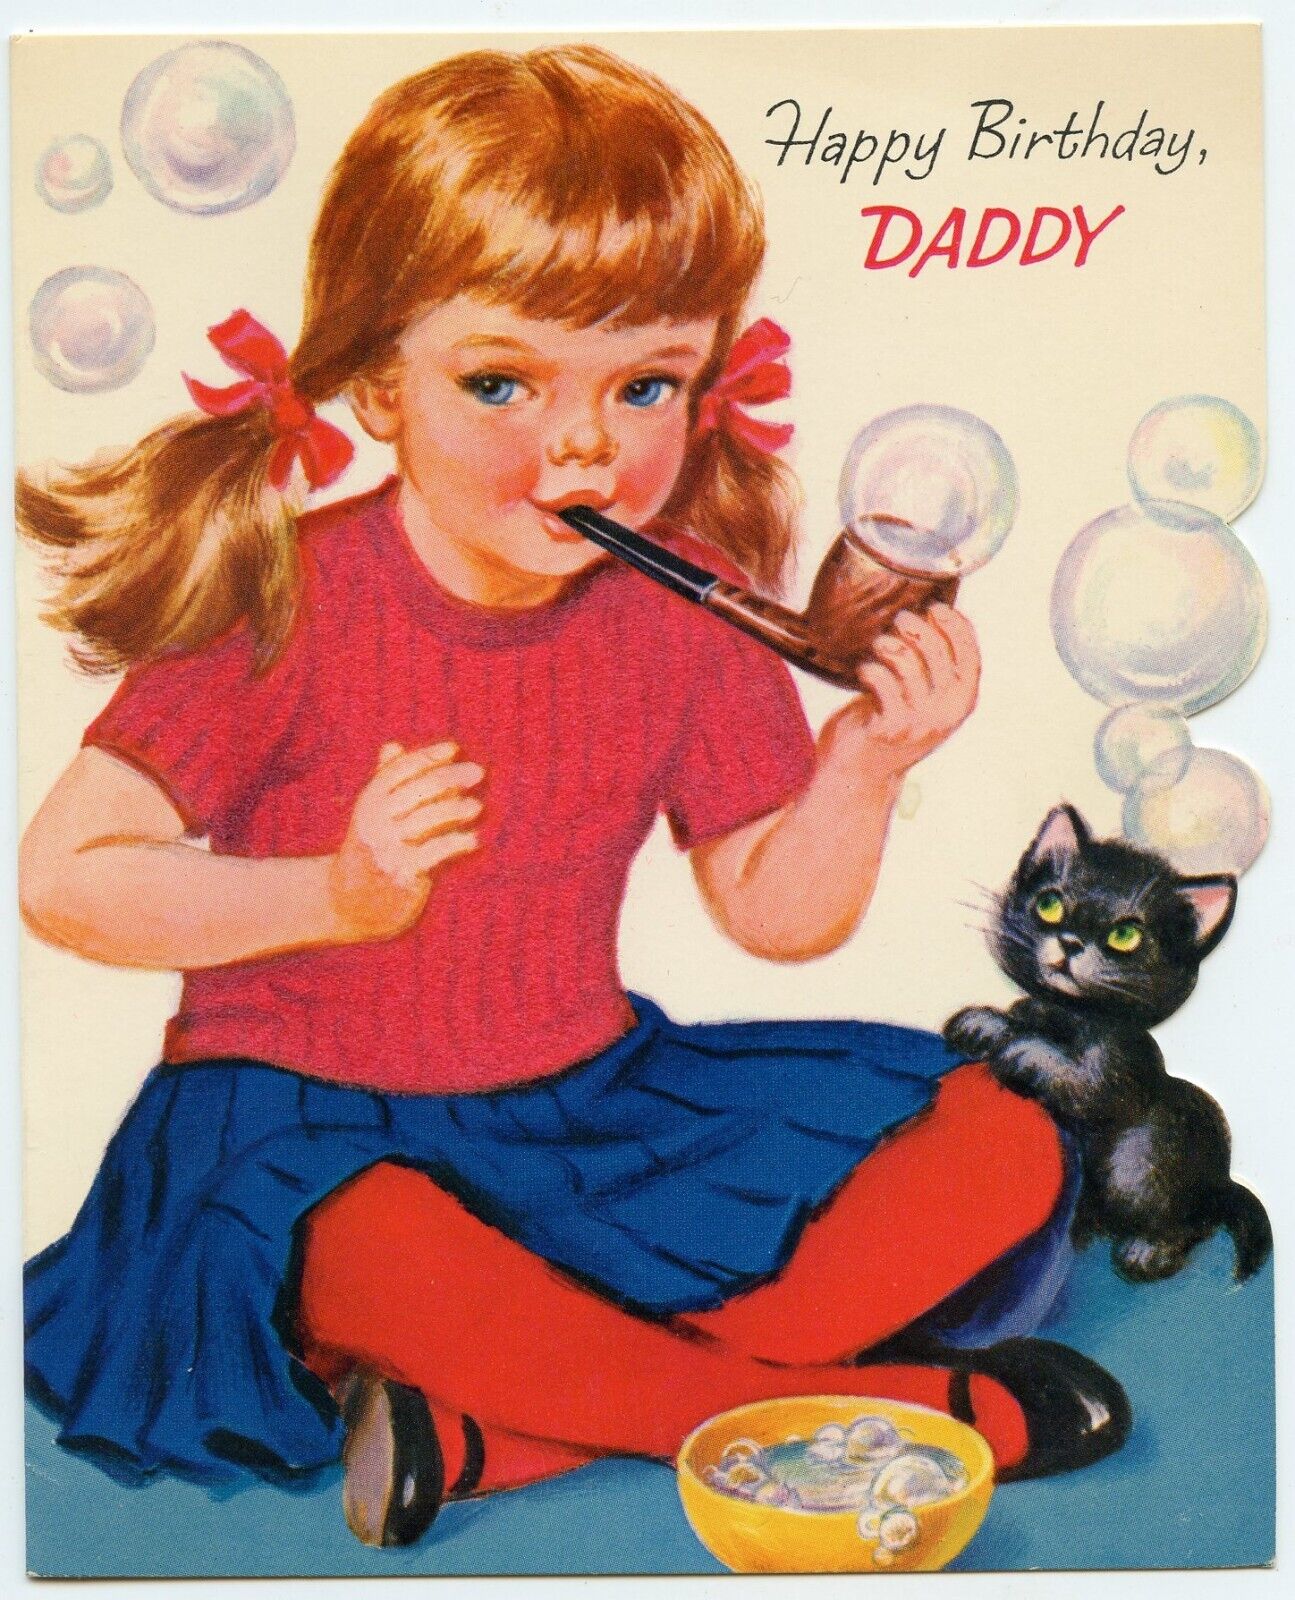 1960\'s Vintage Daddy Birthday Greeting Card - Girl Tobacco Pipe Blowing Bubbles